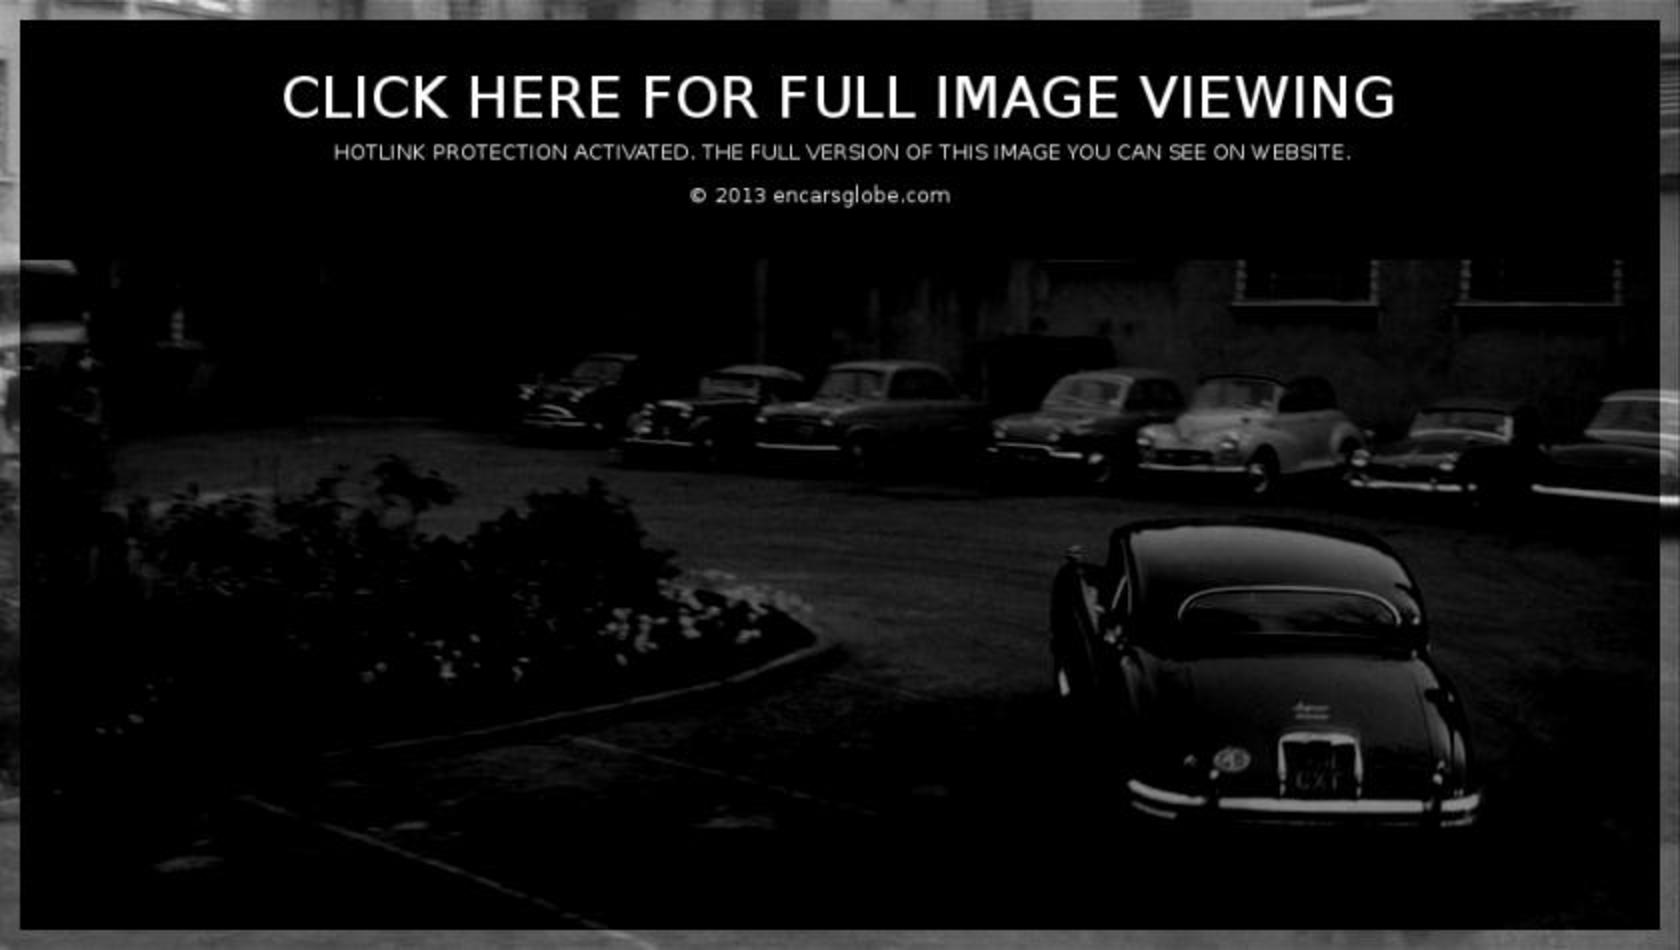 Morris Minor SII: Photo gallery, complete information about model ...